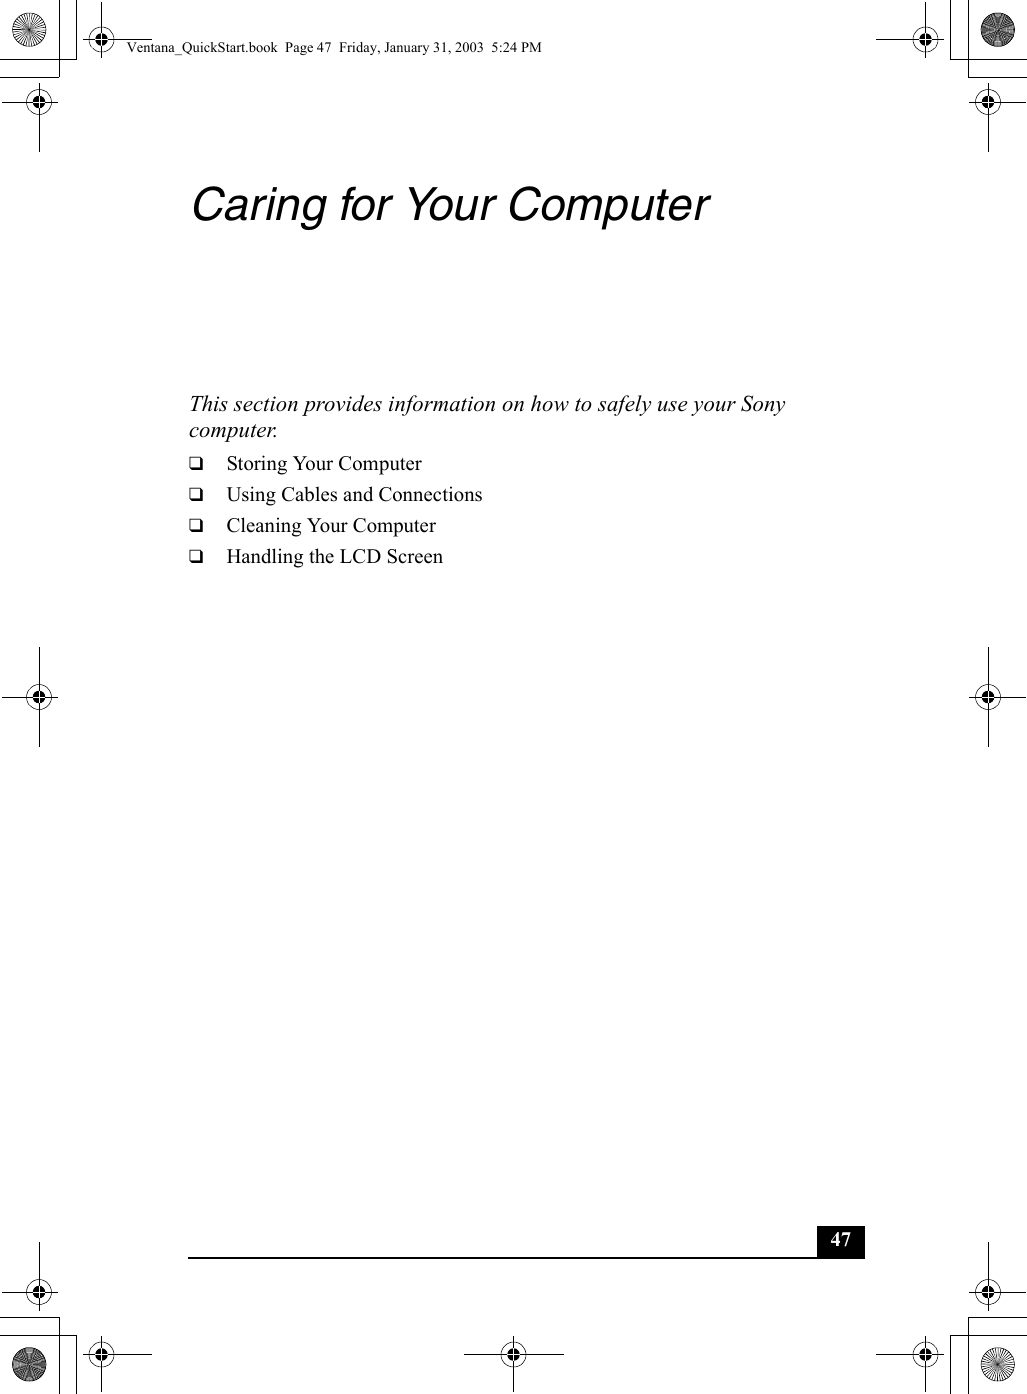 47Caring for Your ComputerThis section provides information on how to safely use your Sony computer.❑Storing Your Computer❑Using Cables and Connections❑Cleaning Your Computer❑Handling the LCD ScreenVentana_QuickStart.book  Page 47  Friday, January 31, 2003  5:24 PM